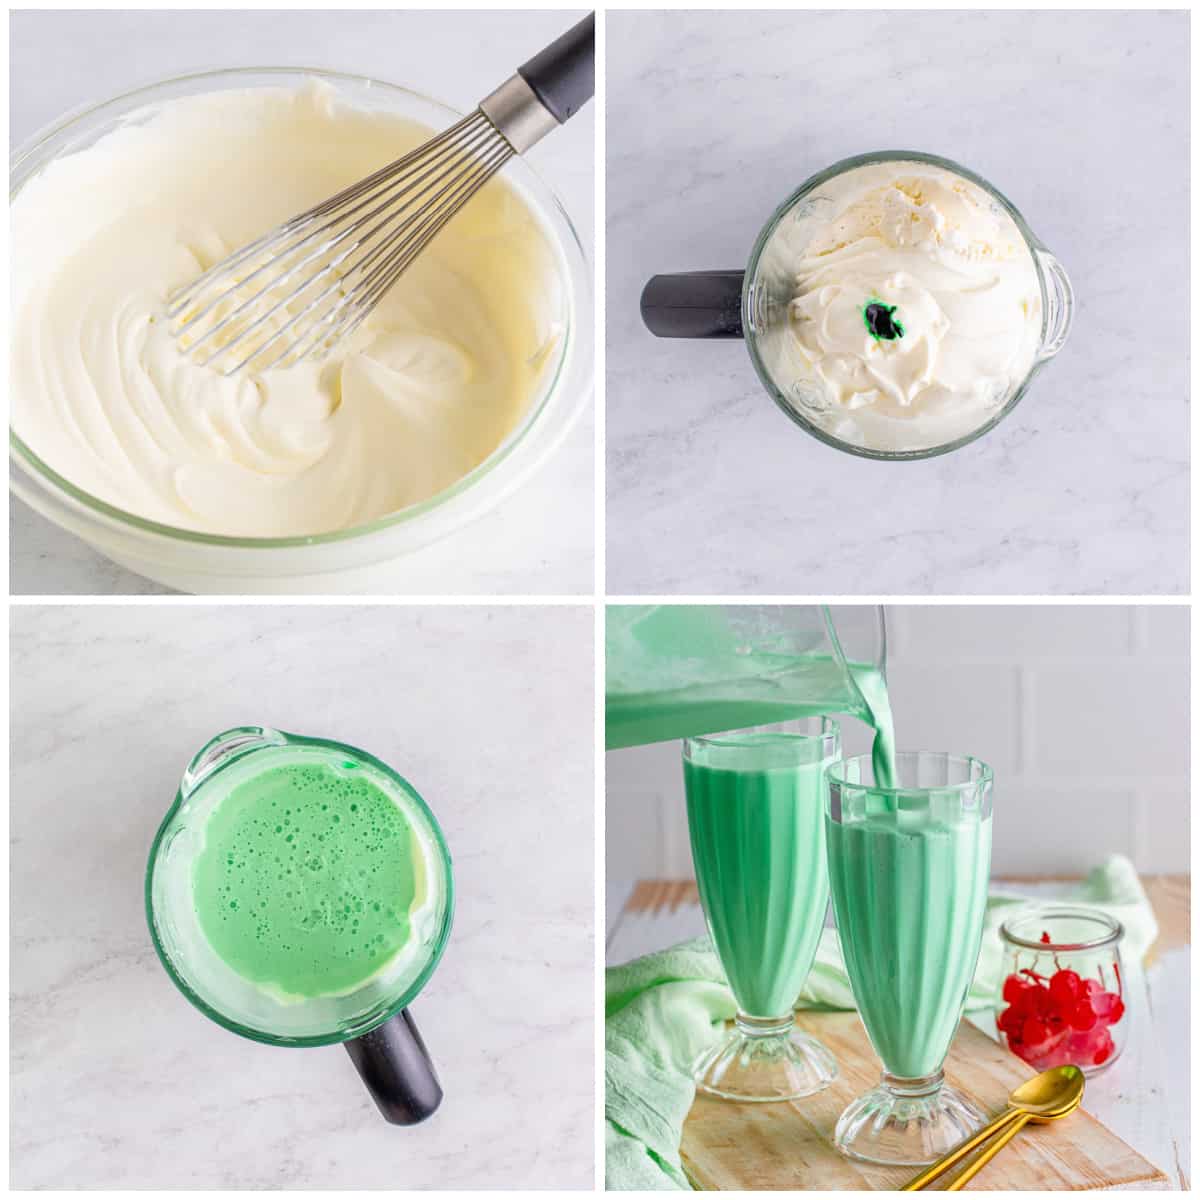 Step by step photos on how to make a Shamrock Shake Recipe.